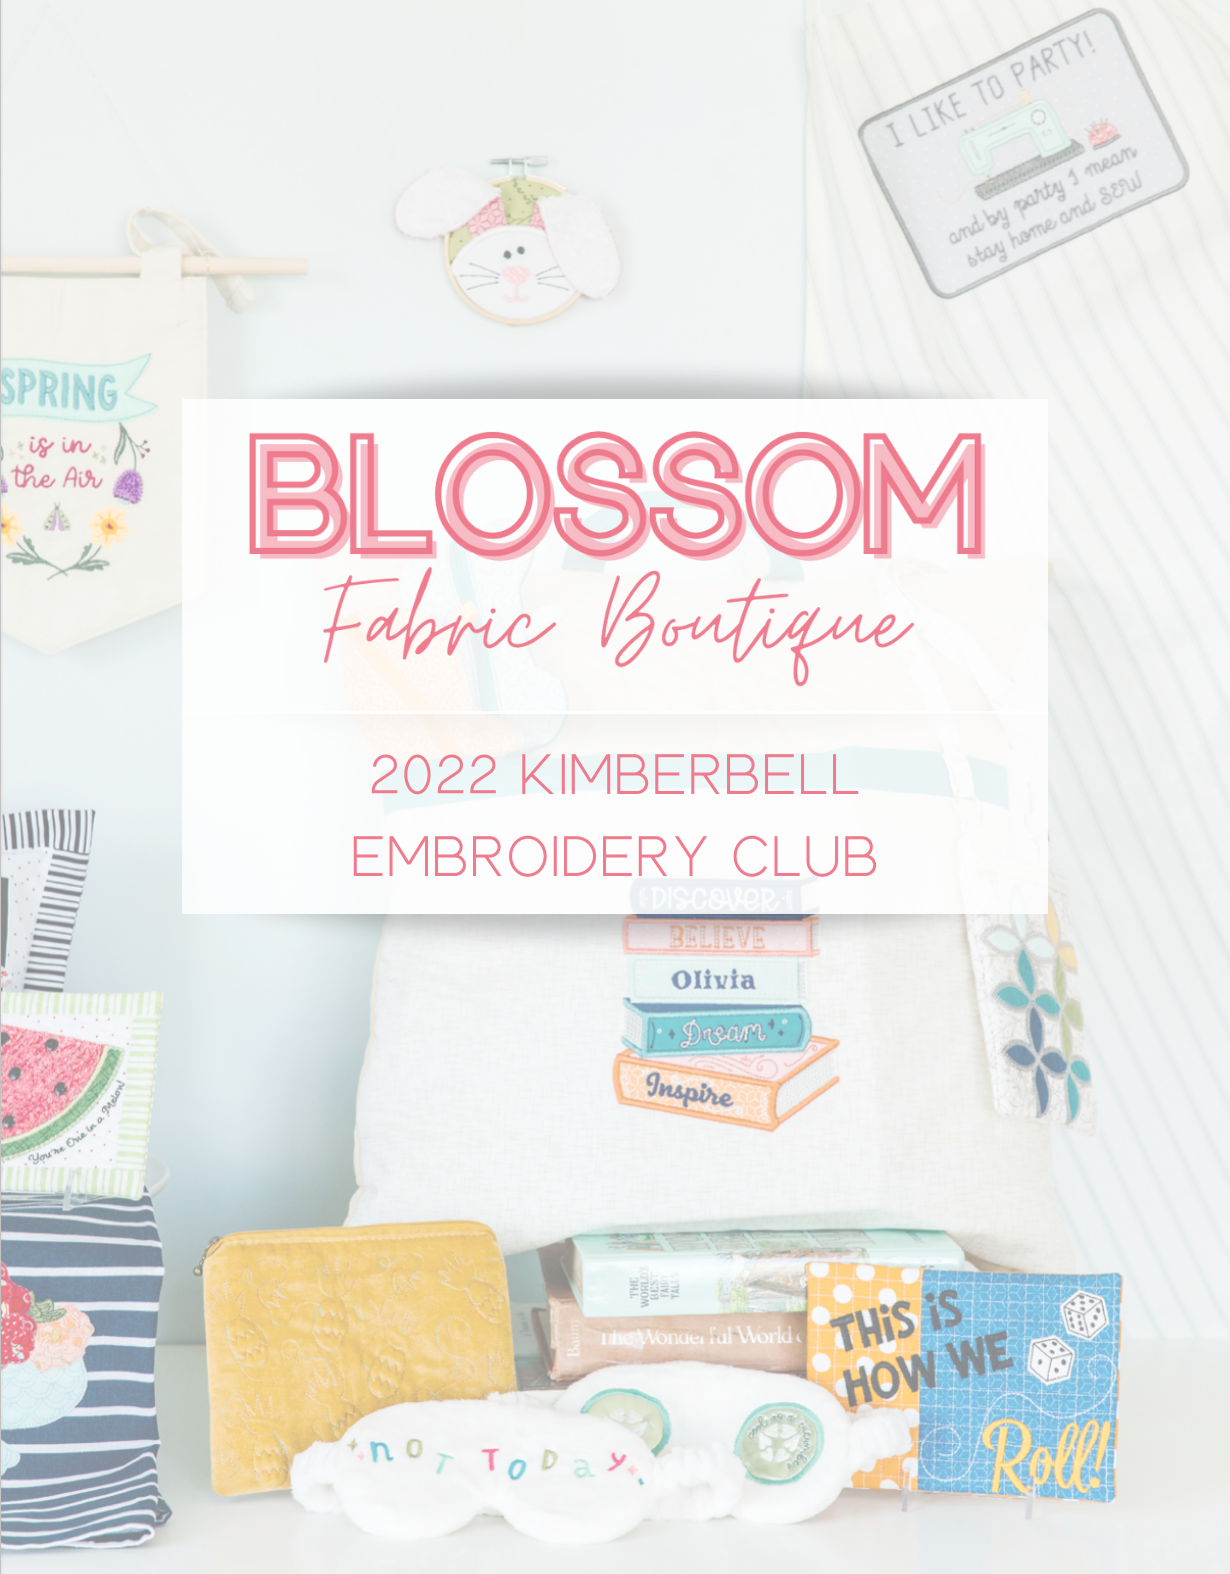 2022 Kimberbell Embroidery Club – Blossom Fabric Boutique